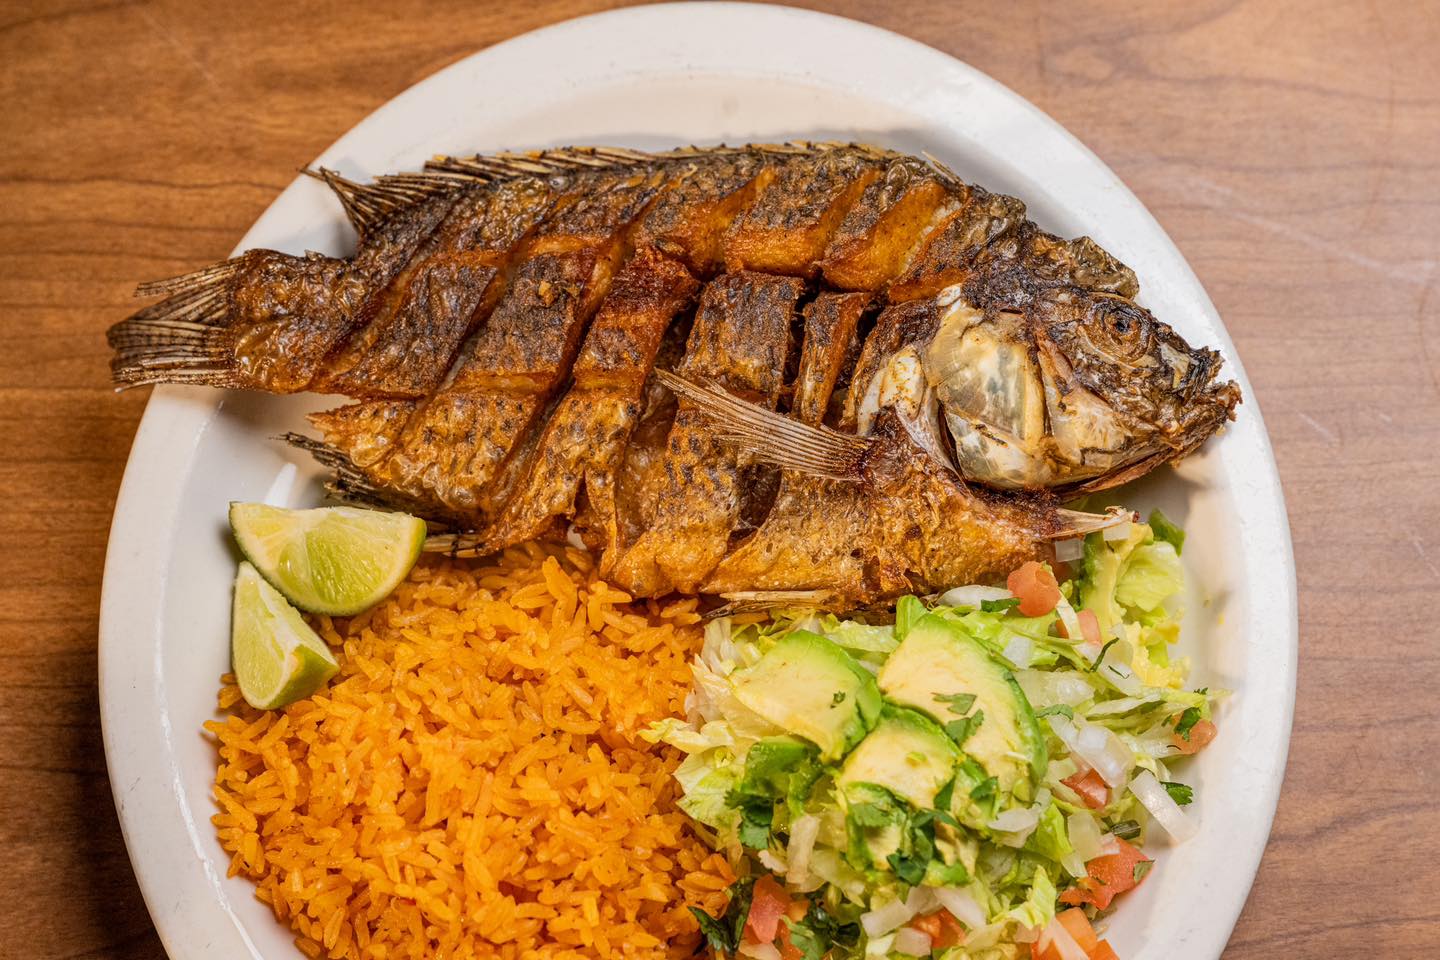 A fried whole fish served on a round white plate with red rice and salad from La Jalisciense Supermercado Y Taqueria in southwest Detroit, Michigan.